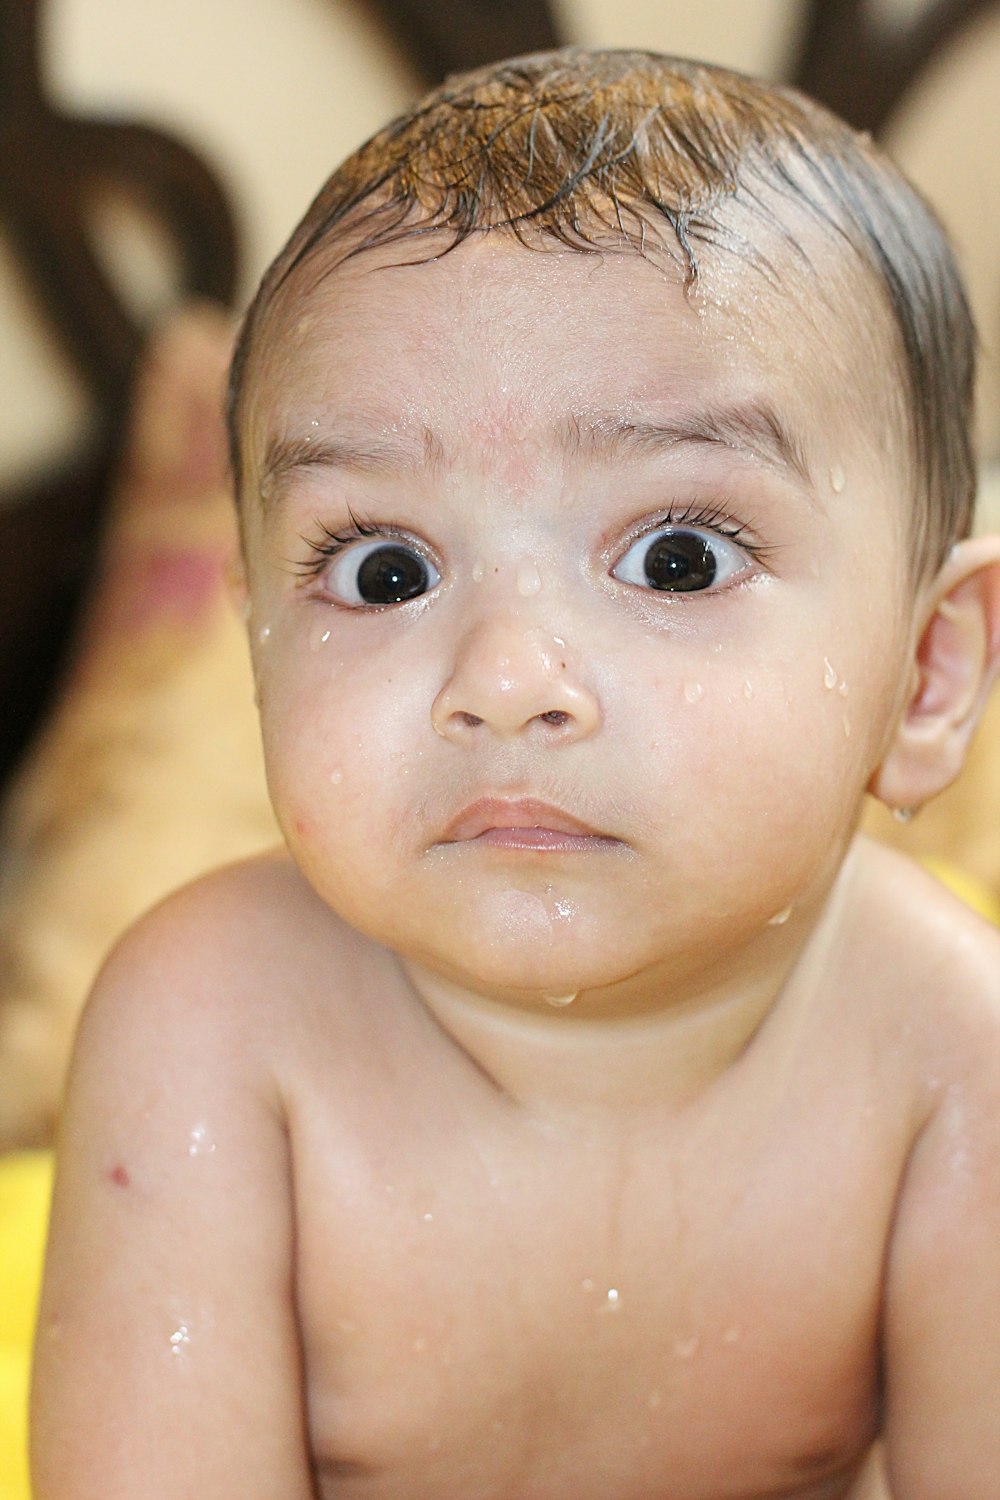 a close up of a baby with a wet face